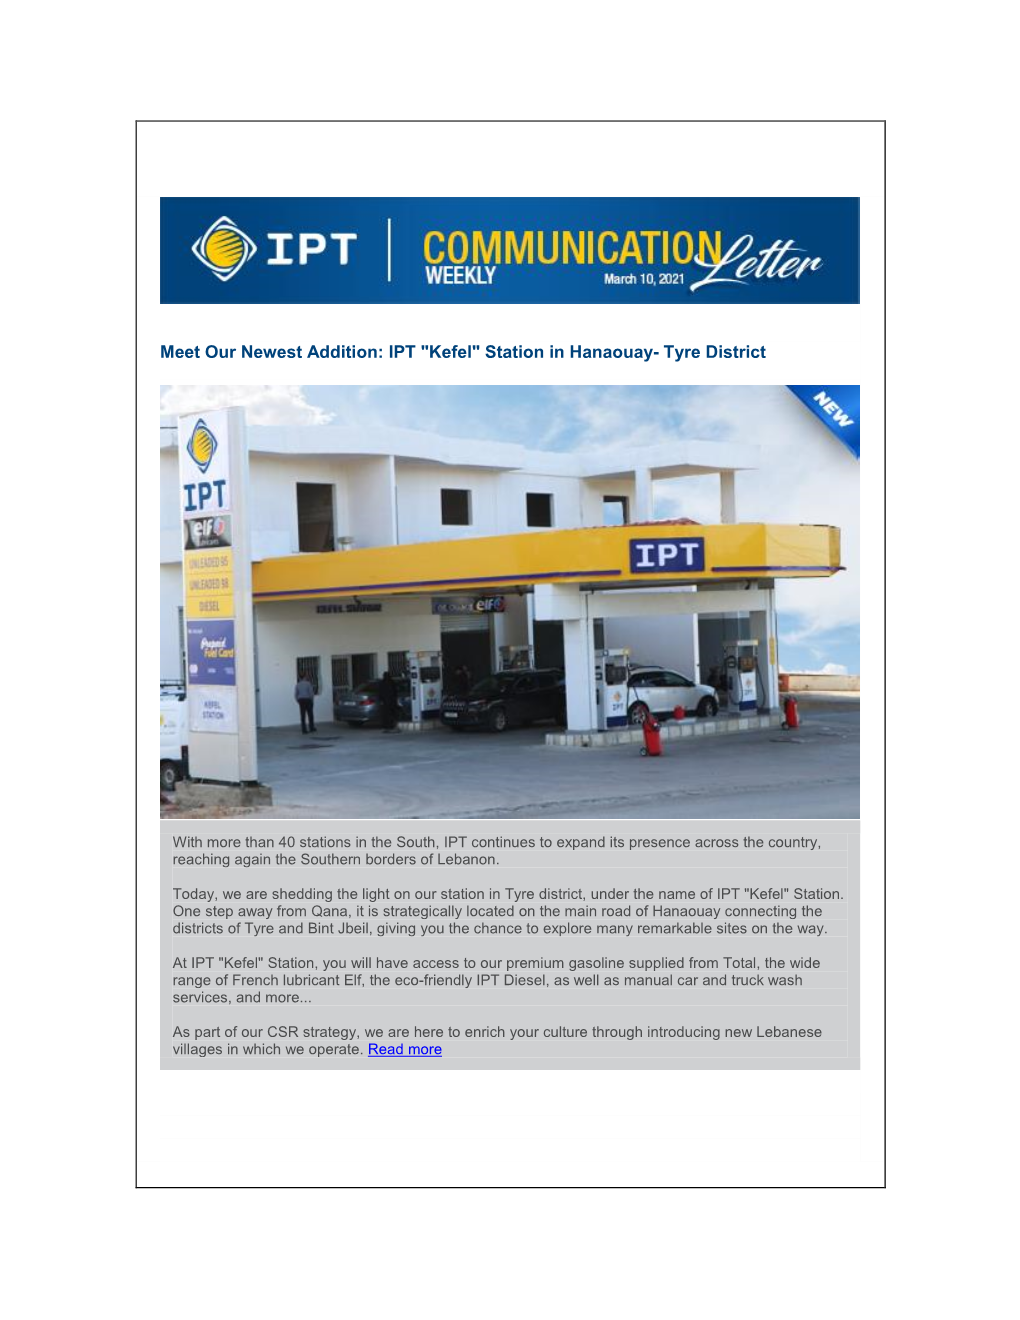 Meet Our Newest Addition: IPT "Kefel" Station in Hanaouay- Tyre District